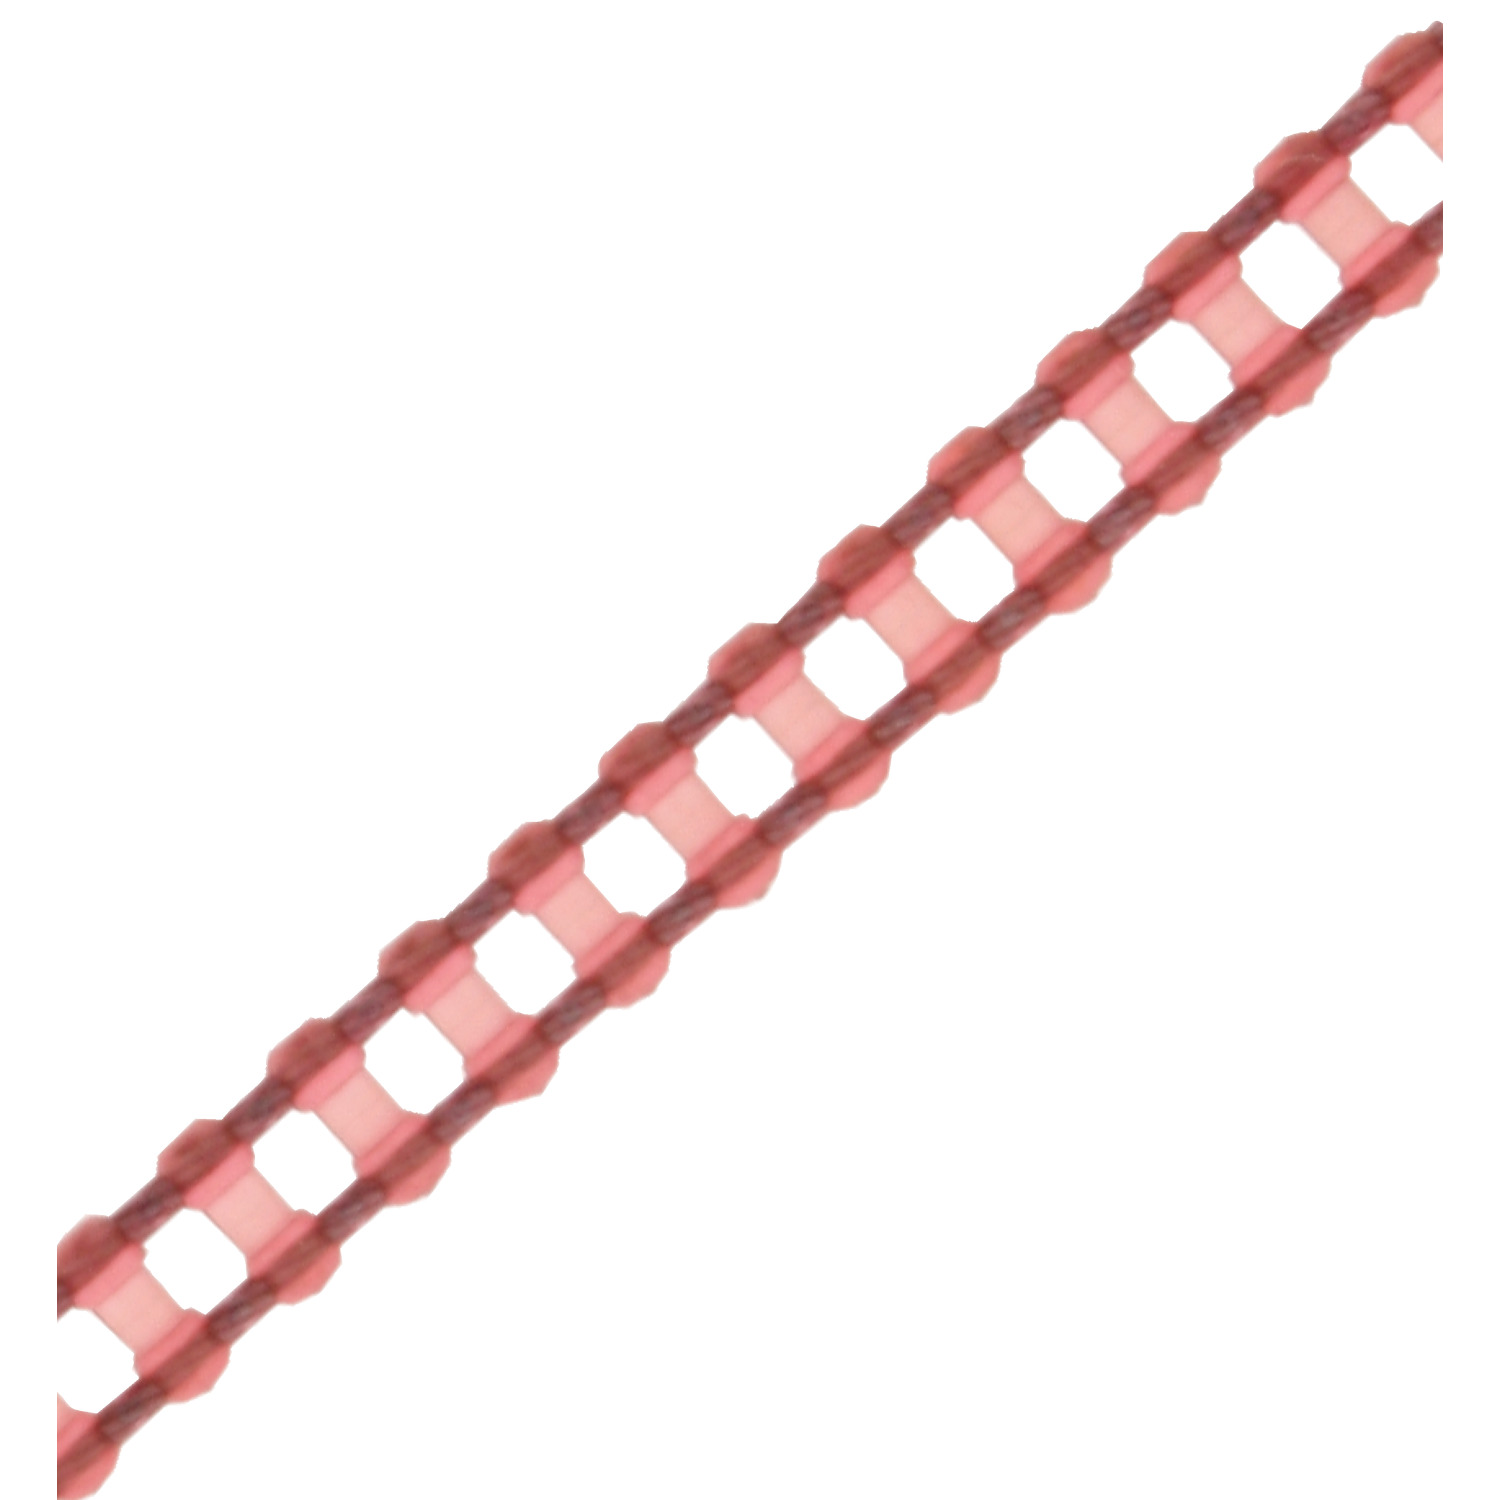 R1035.300 R1035.300-E Cable Chain 4mm SS 